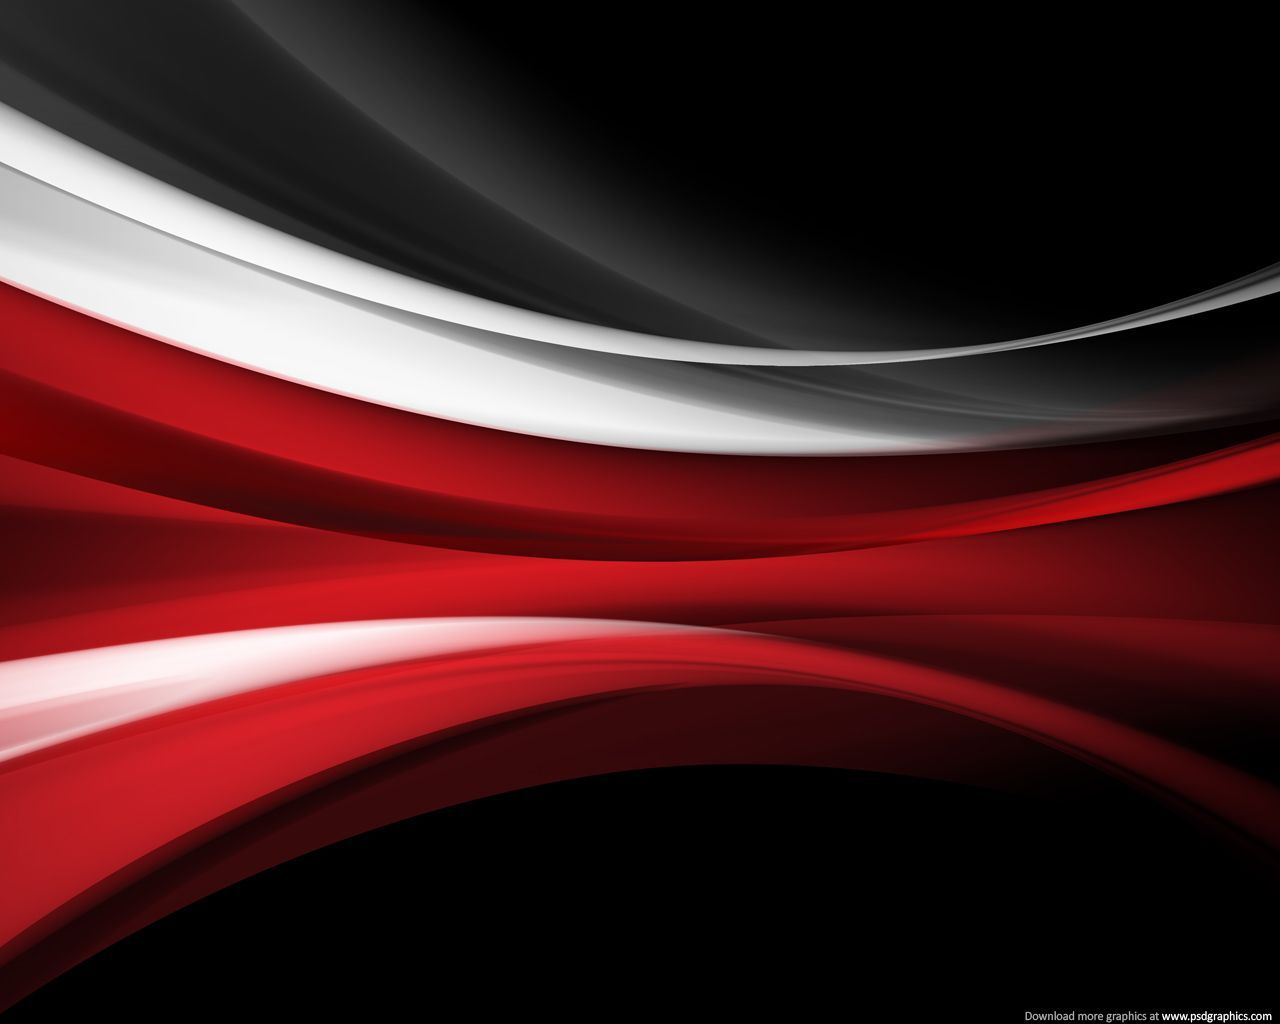 Black & Red Backgrounds Group (65+)